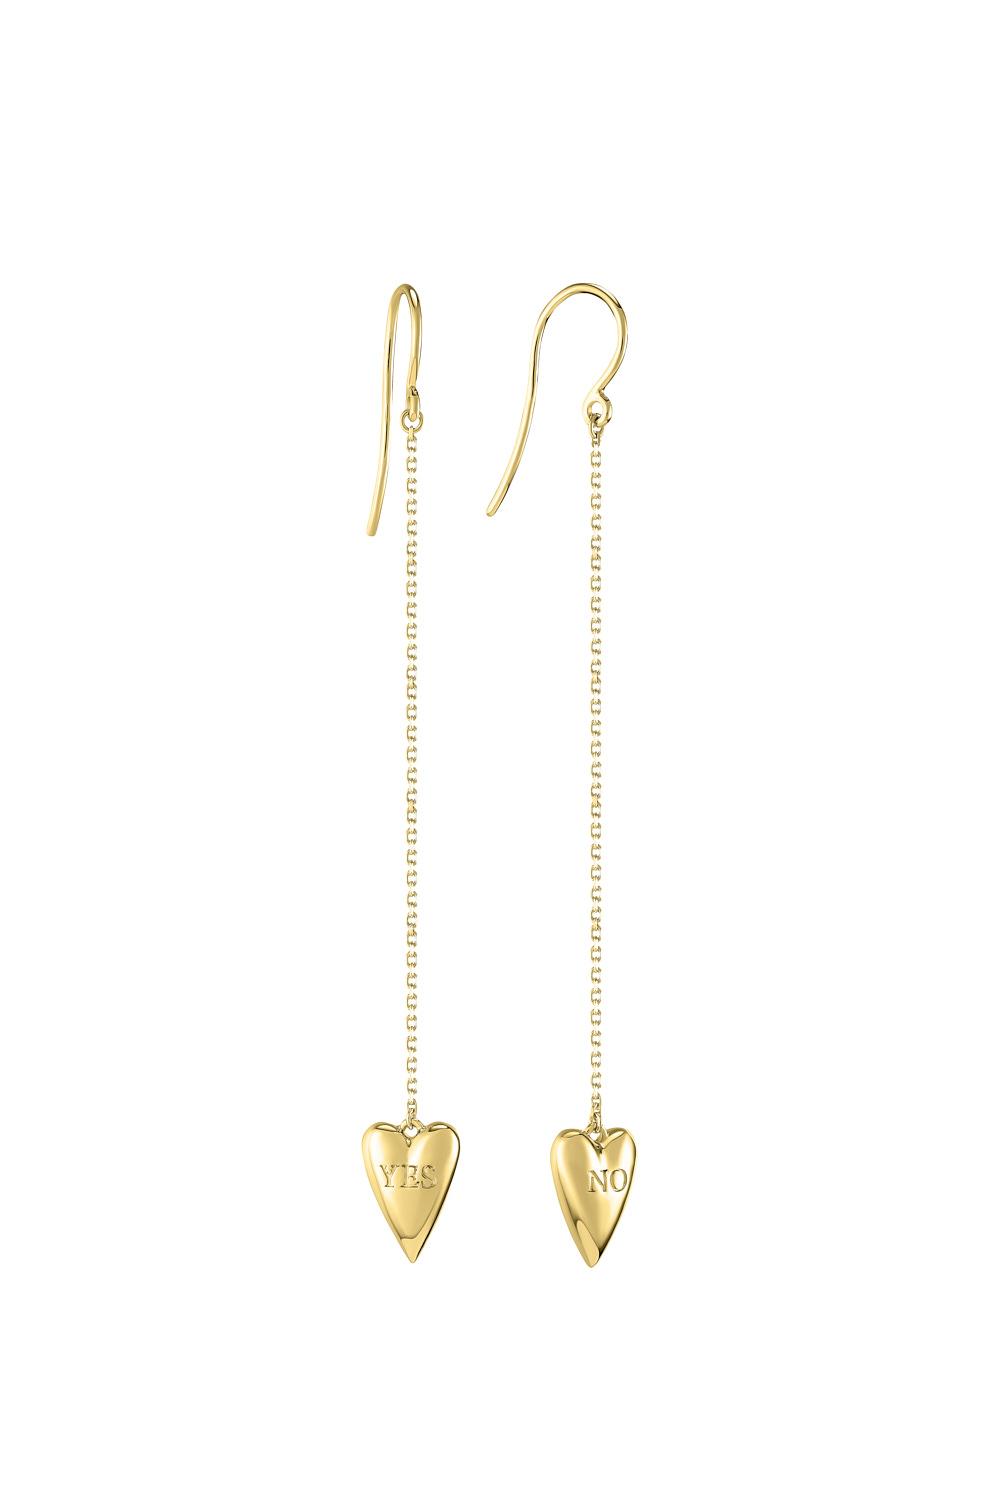 Yes-no Heart Earrings Yellow Gold Plated